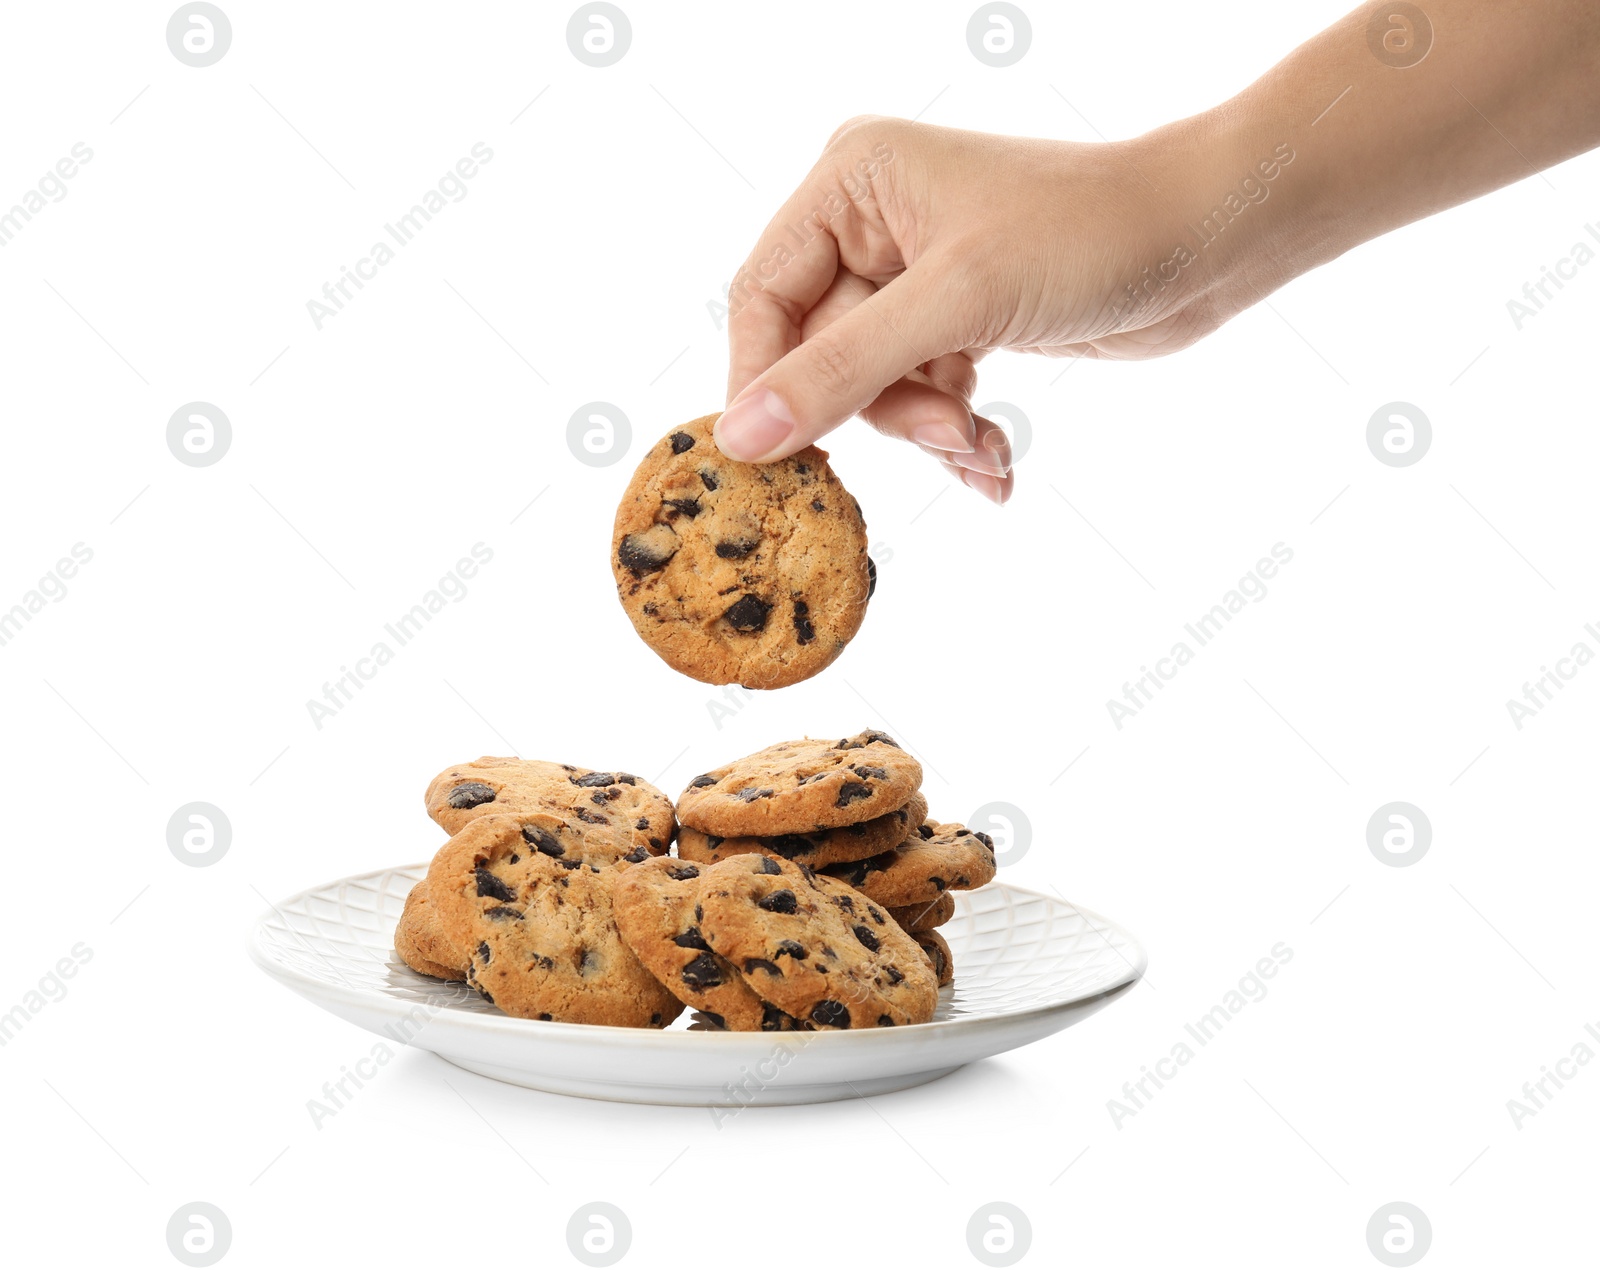 Photo of Woman holding tasty chocolate chip cookie over plate on white background, closeup